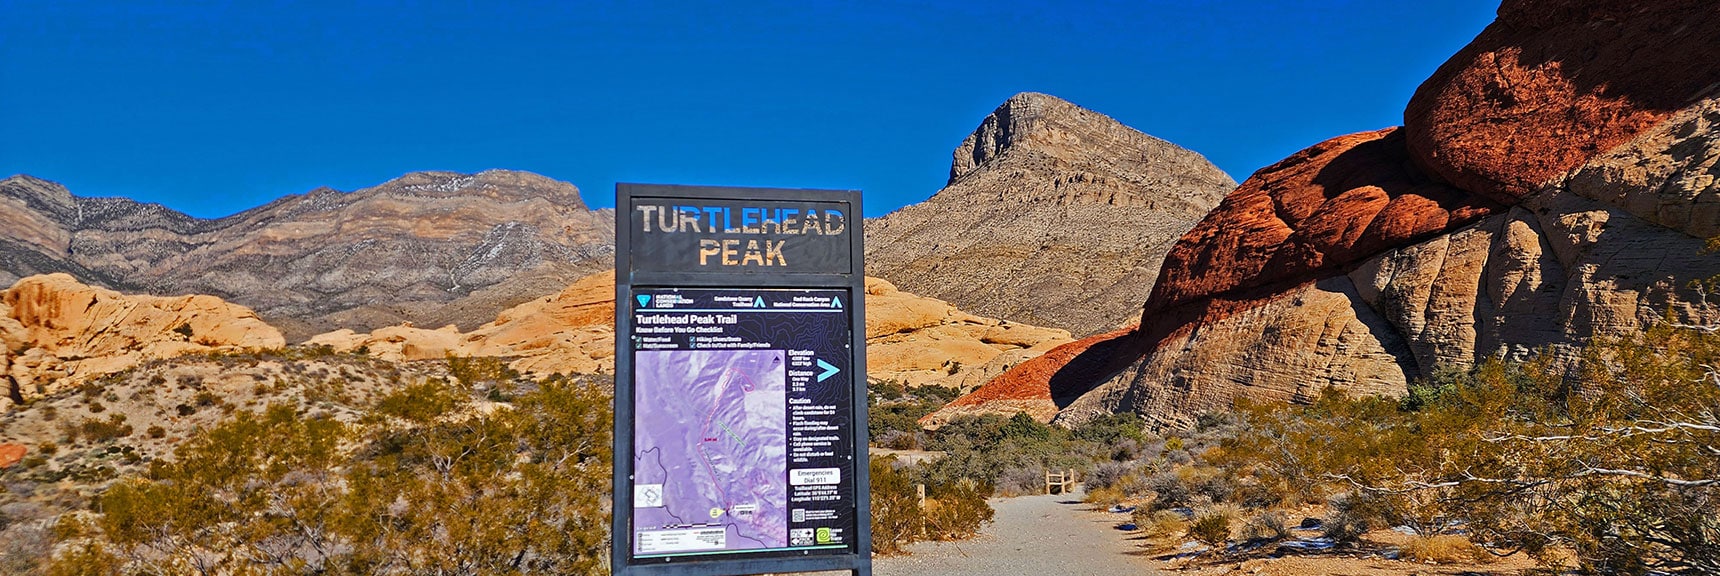 Take the Turtlehead Peak Trail from the Sandstone Quarry Parking Area | 3 Basin Circuit | Calico Basin, Brownstone Basin, Red Rock Canyon, Nevada